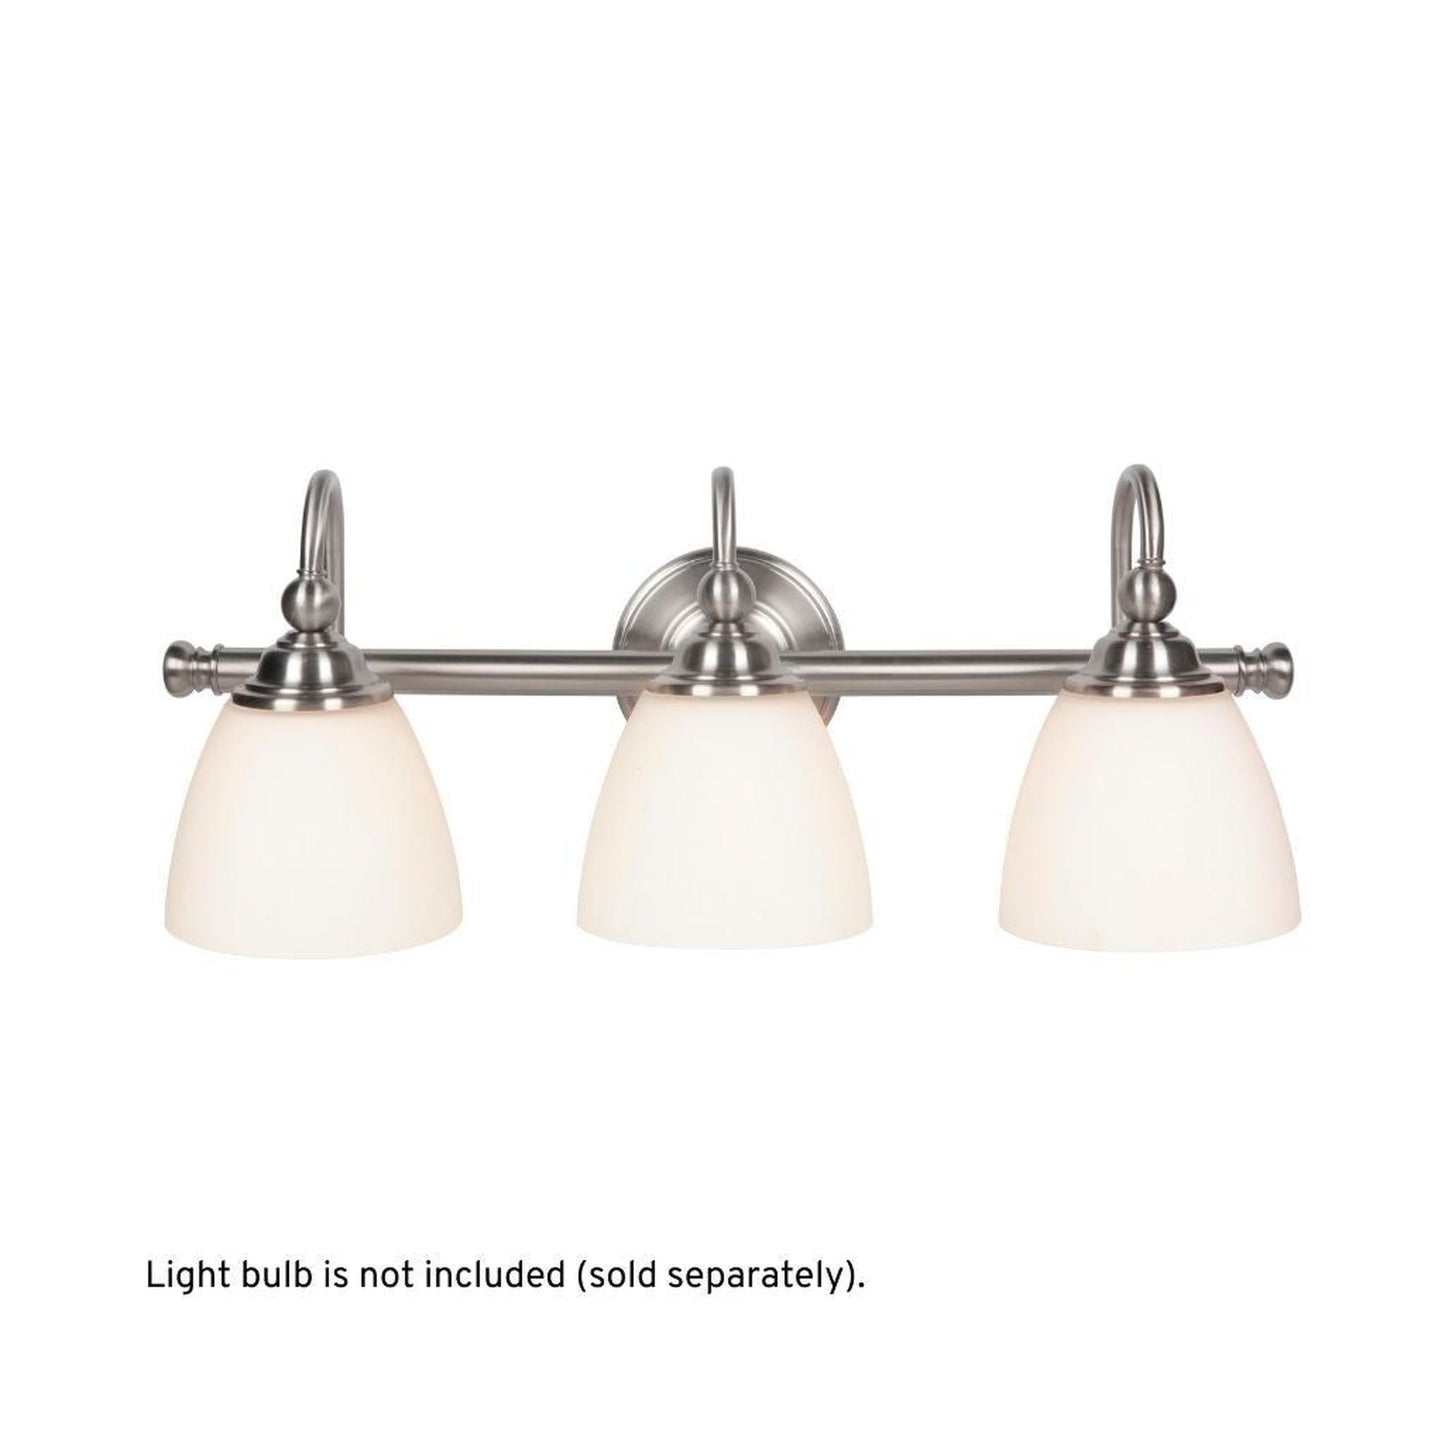 Craftmade Brighton 24" 3-Light Brushed Polished Nickel Vanity Light With White Frosted Glass Shades